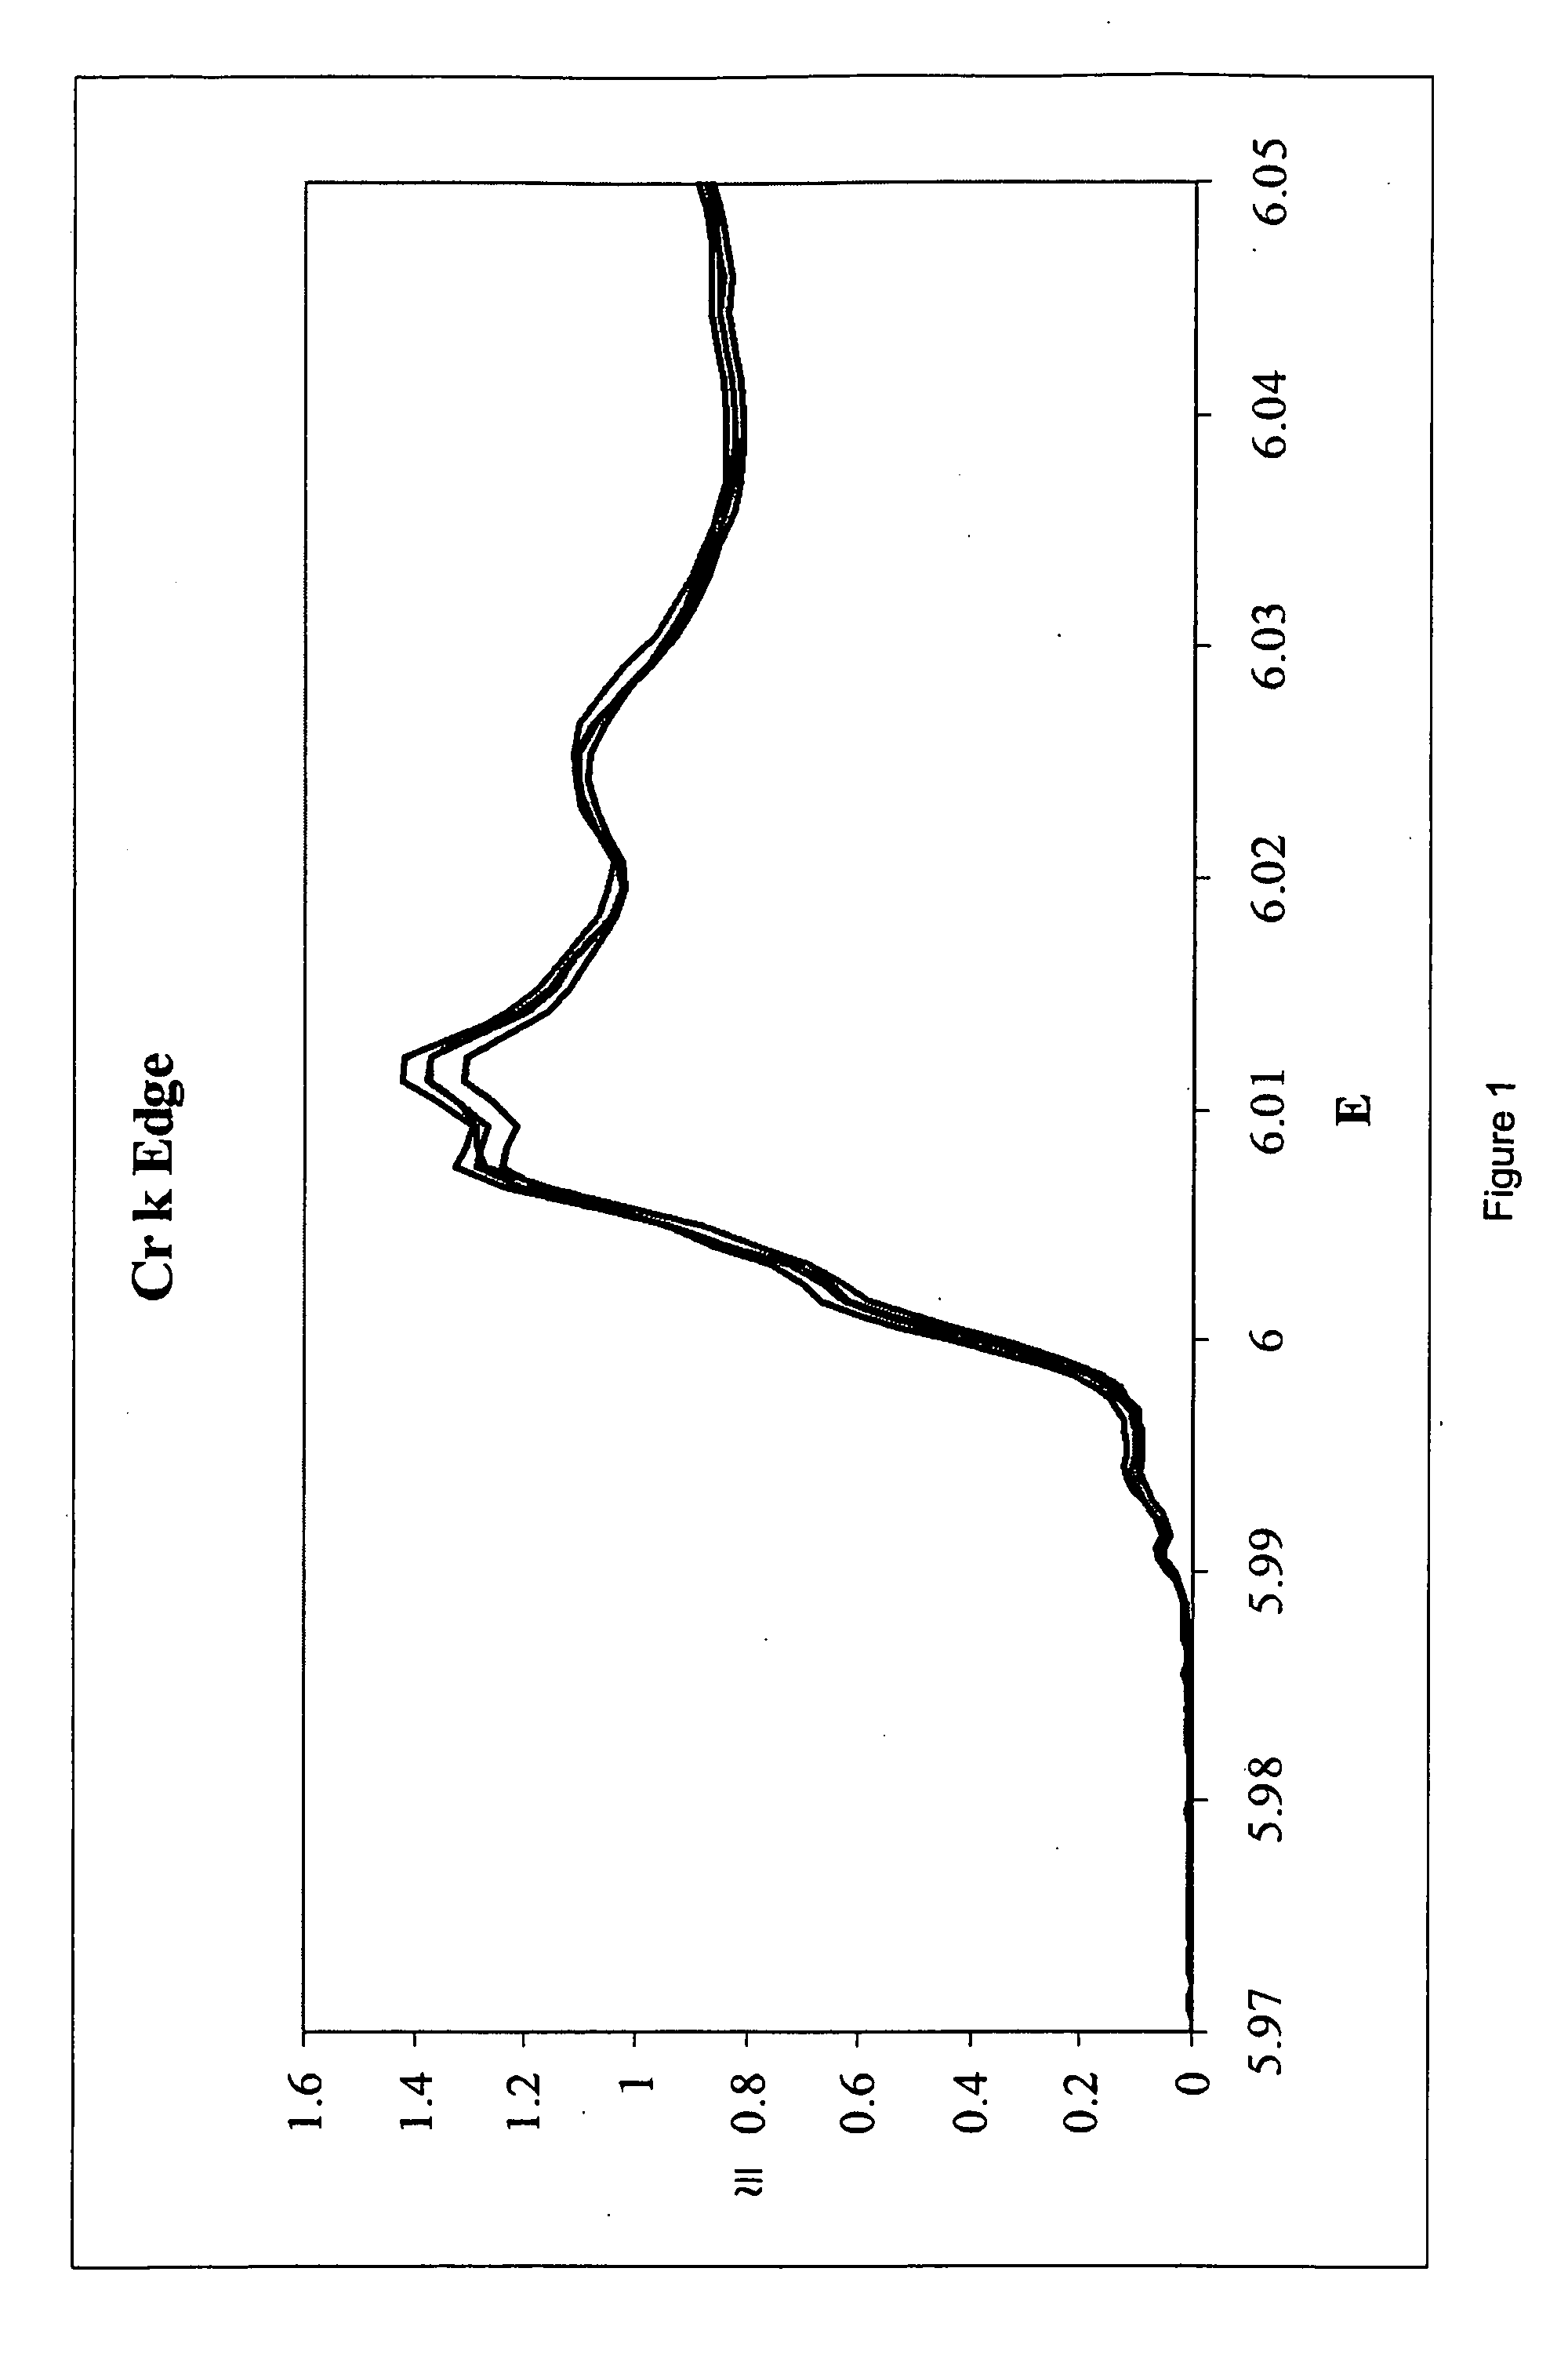 Compositions containing chromium, oxygen and gold, their preparation, and their use as catalysts and catalyst precursors